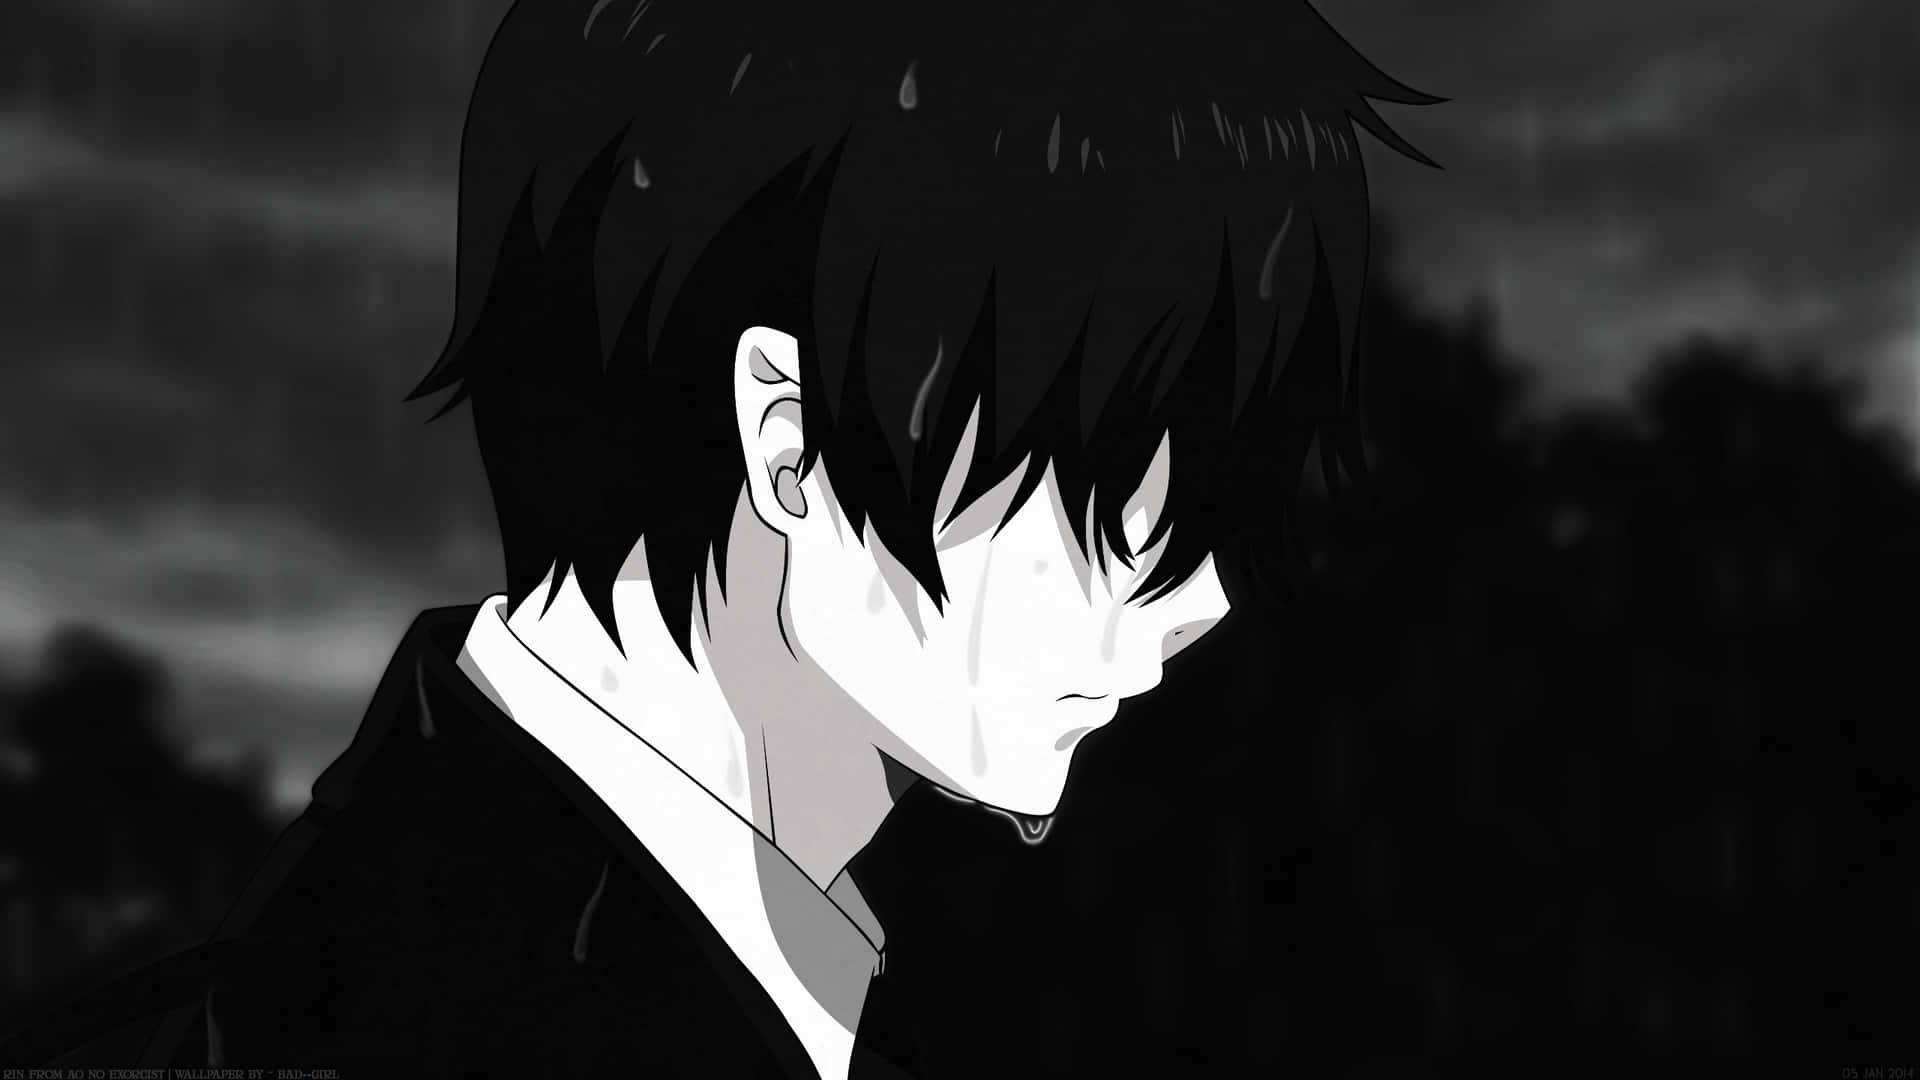 A young anime character lost in thought and sorrow. Wallpaper